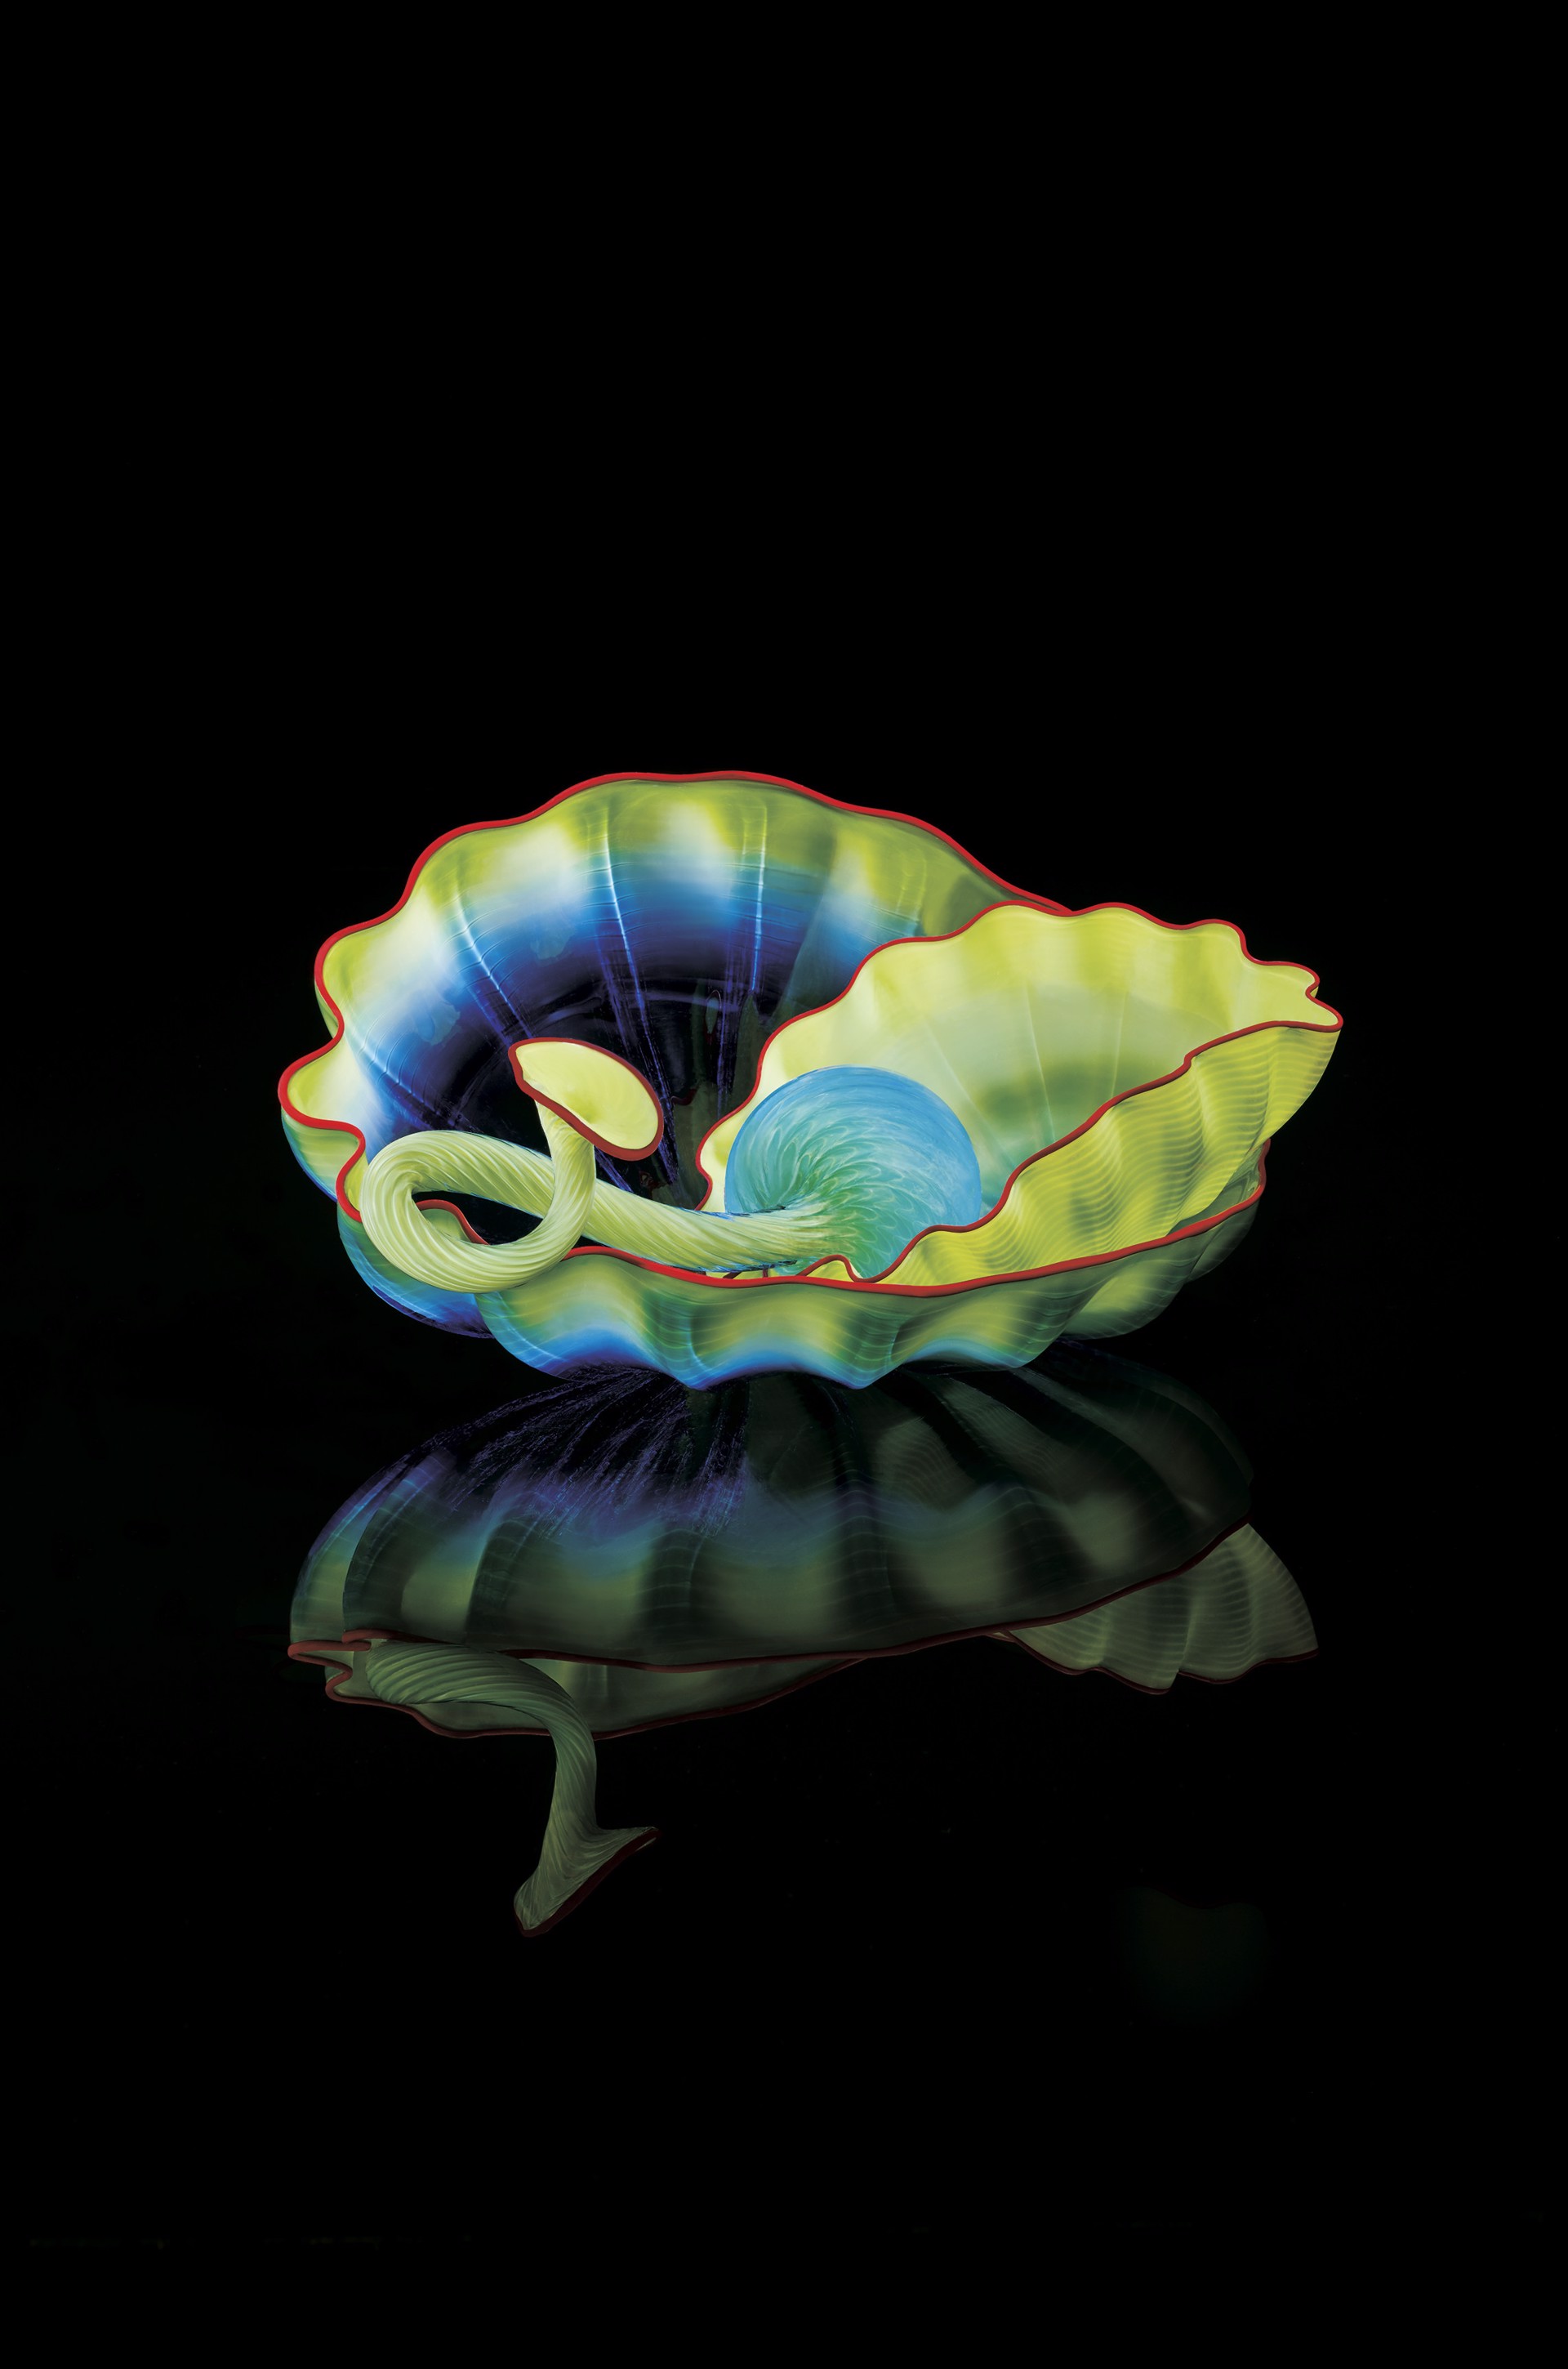 Seagrass Seaform Studio Edition 2021 by Dale Chihuly